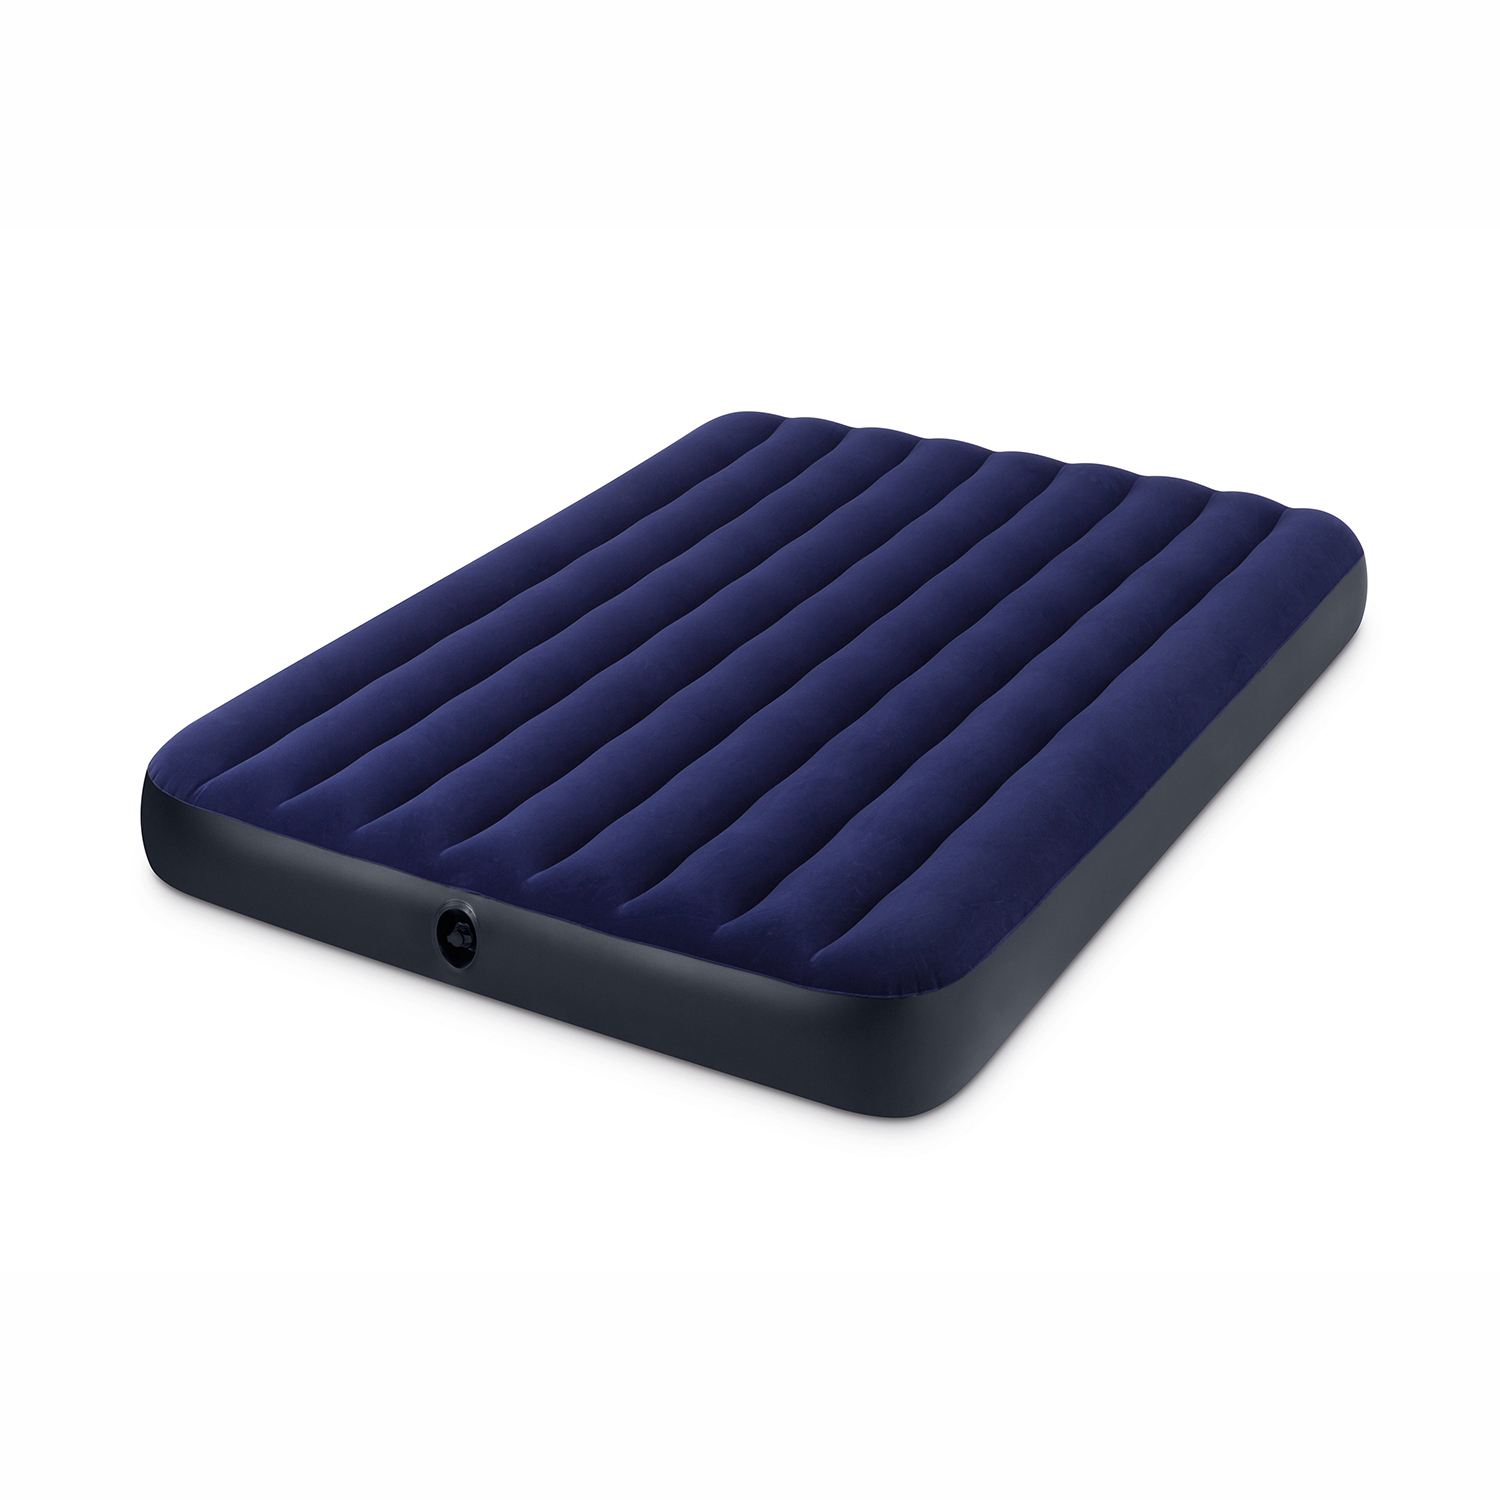 Intex queen 8.75″ classic downy inflatable airbed mattress for $9